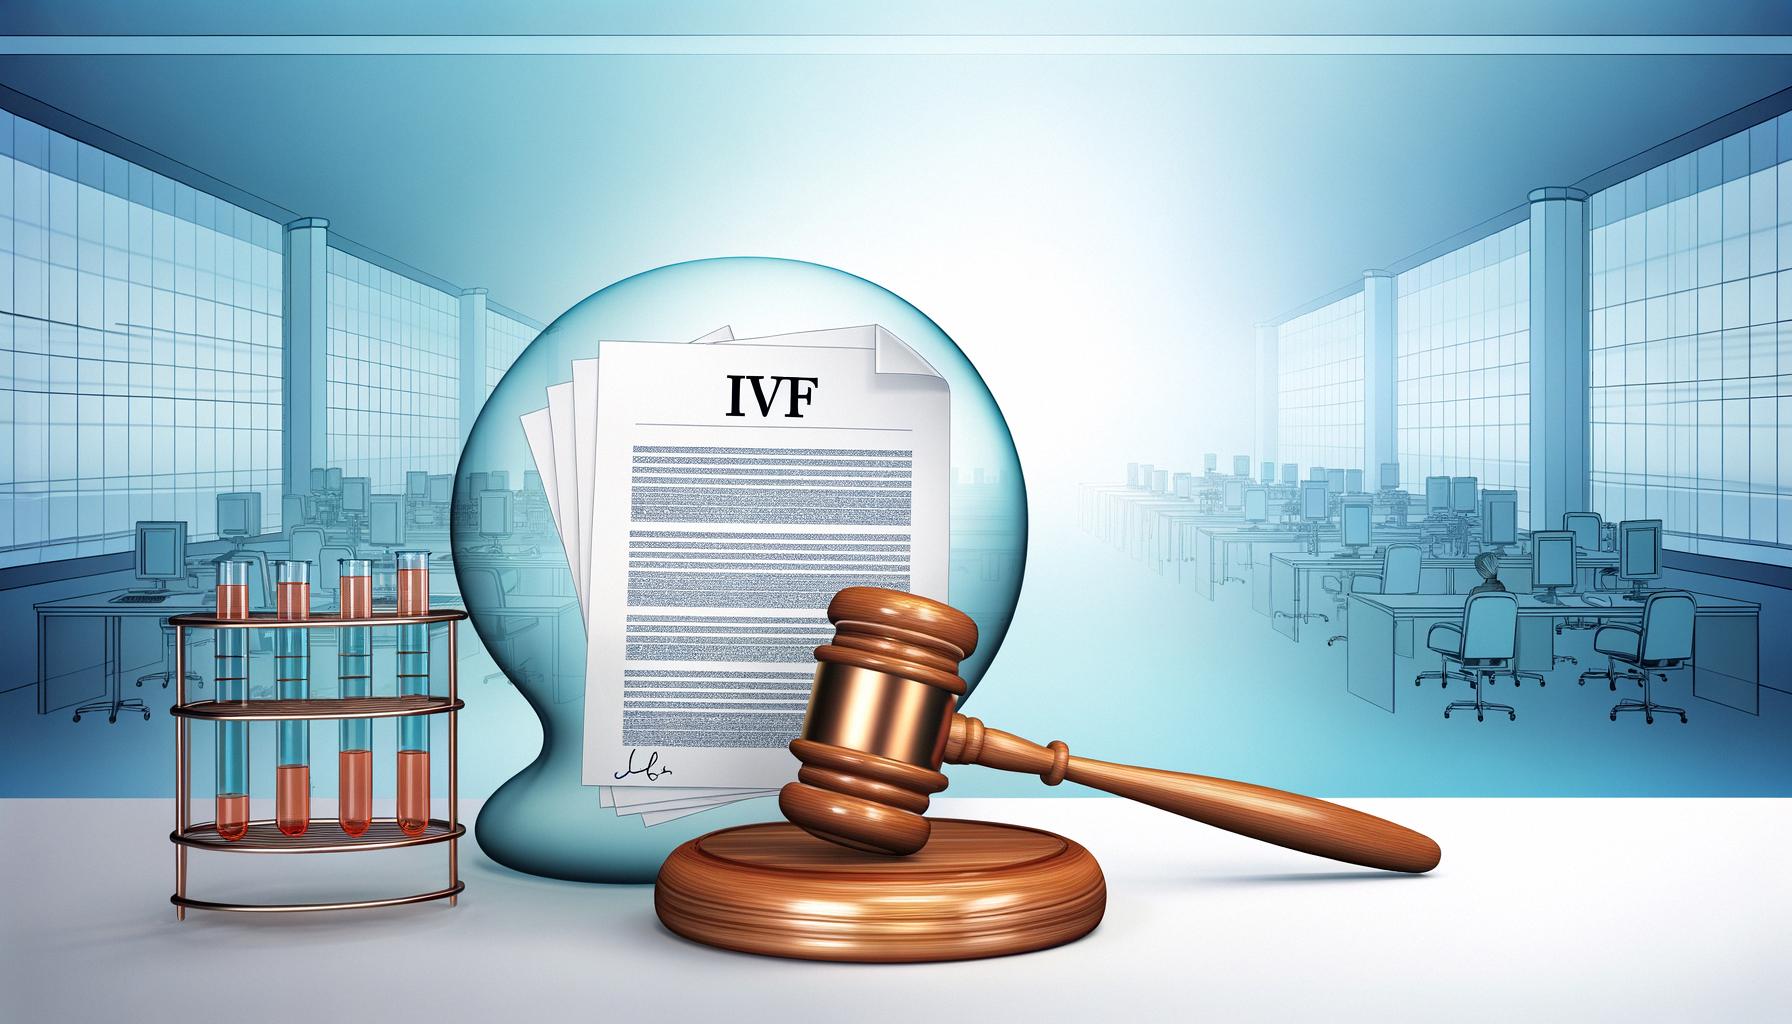 IVF examined through legislative, clinical, and societal lenses amid changing reproductive norms.